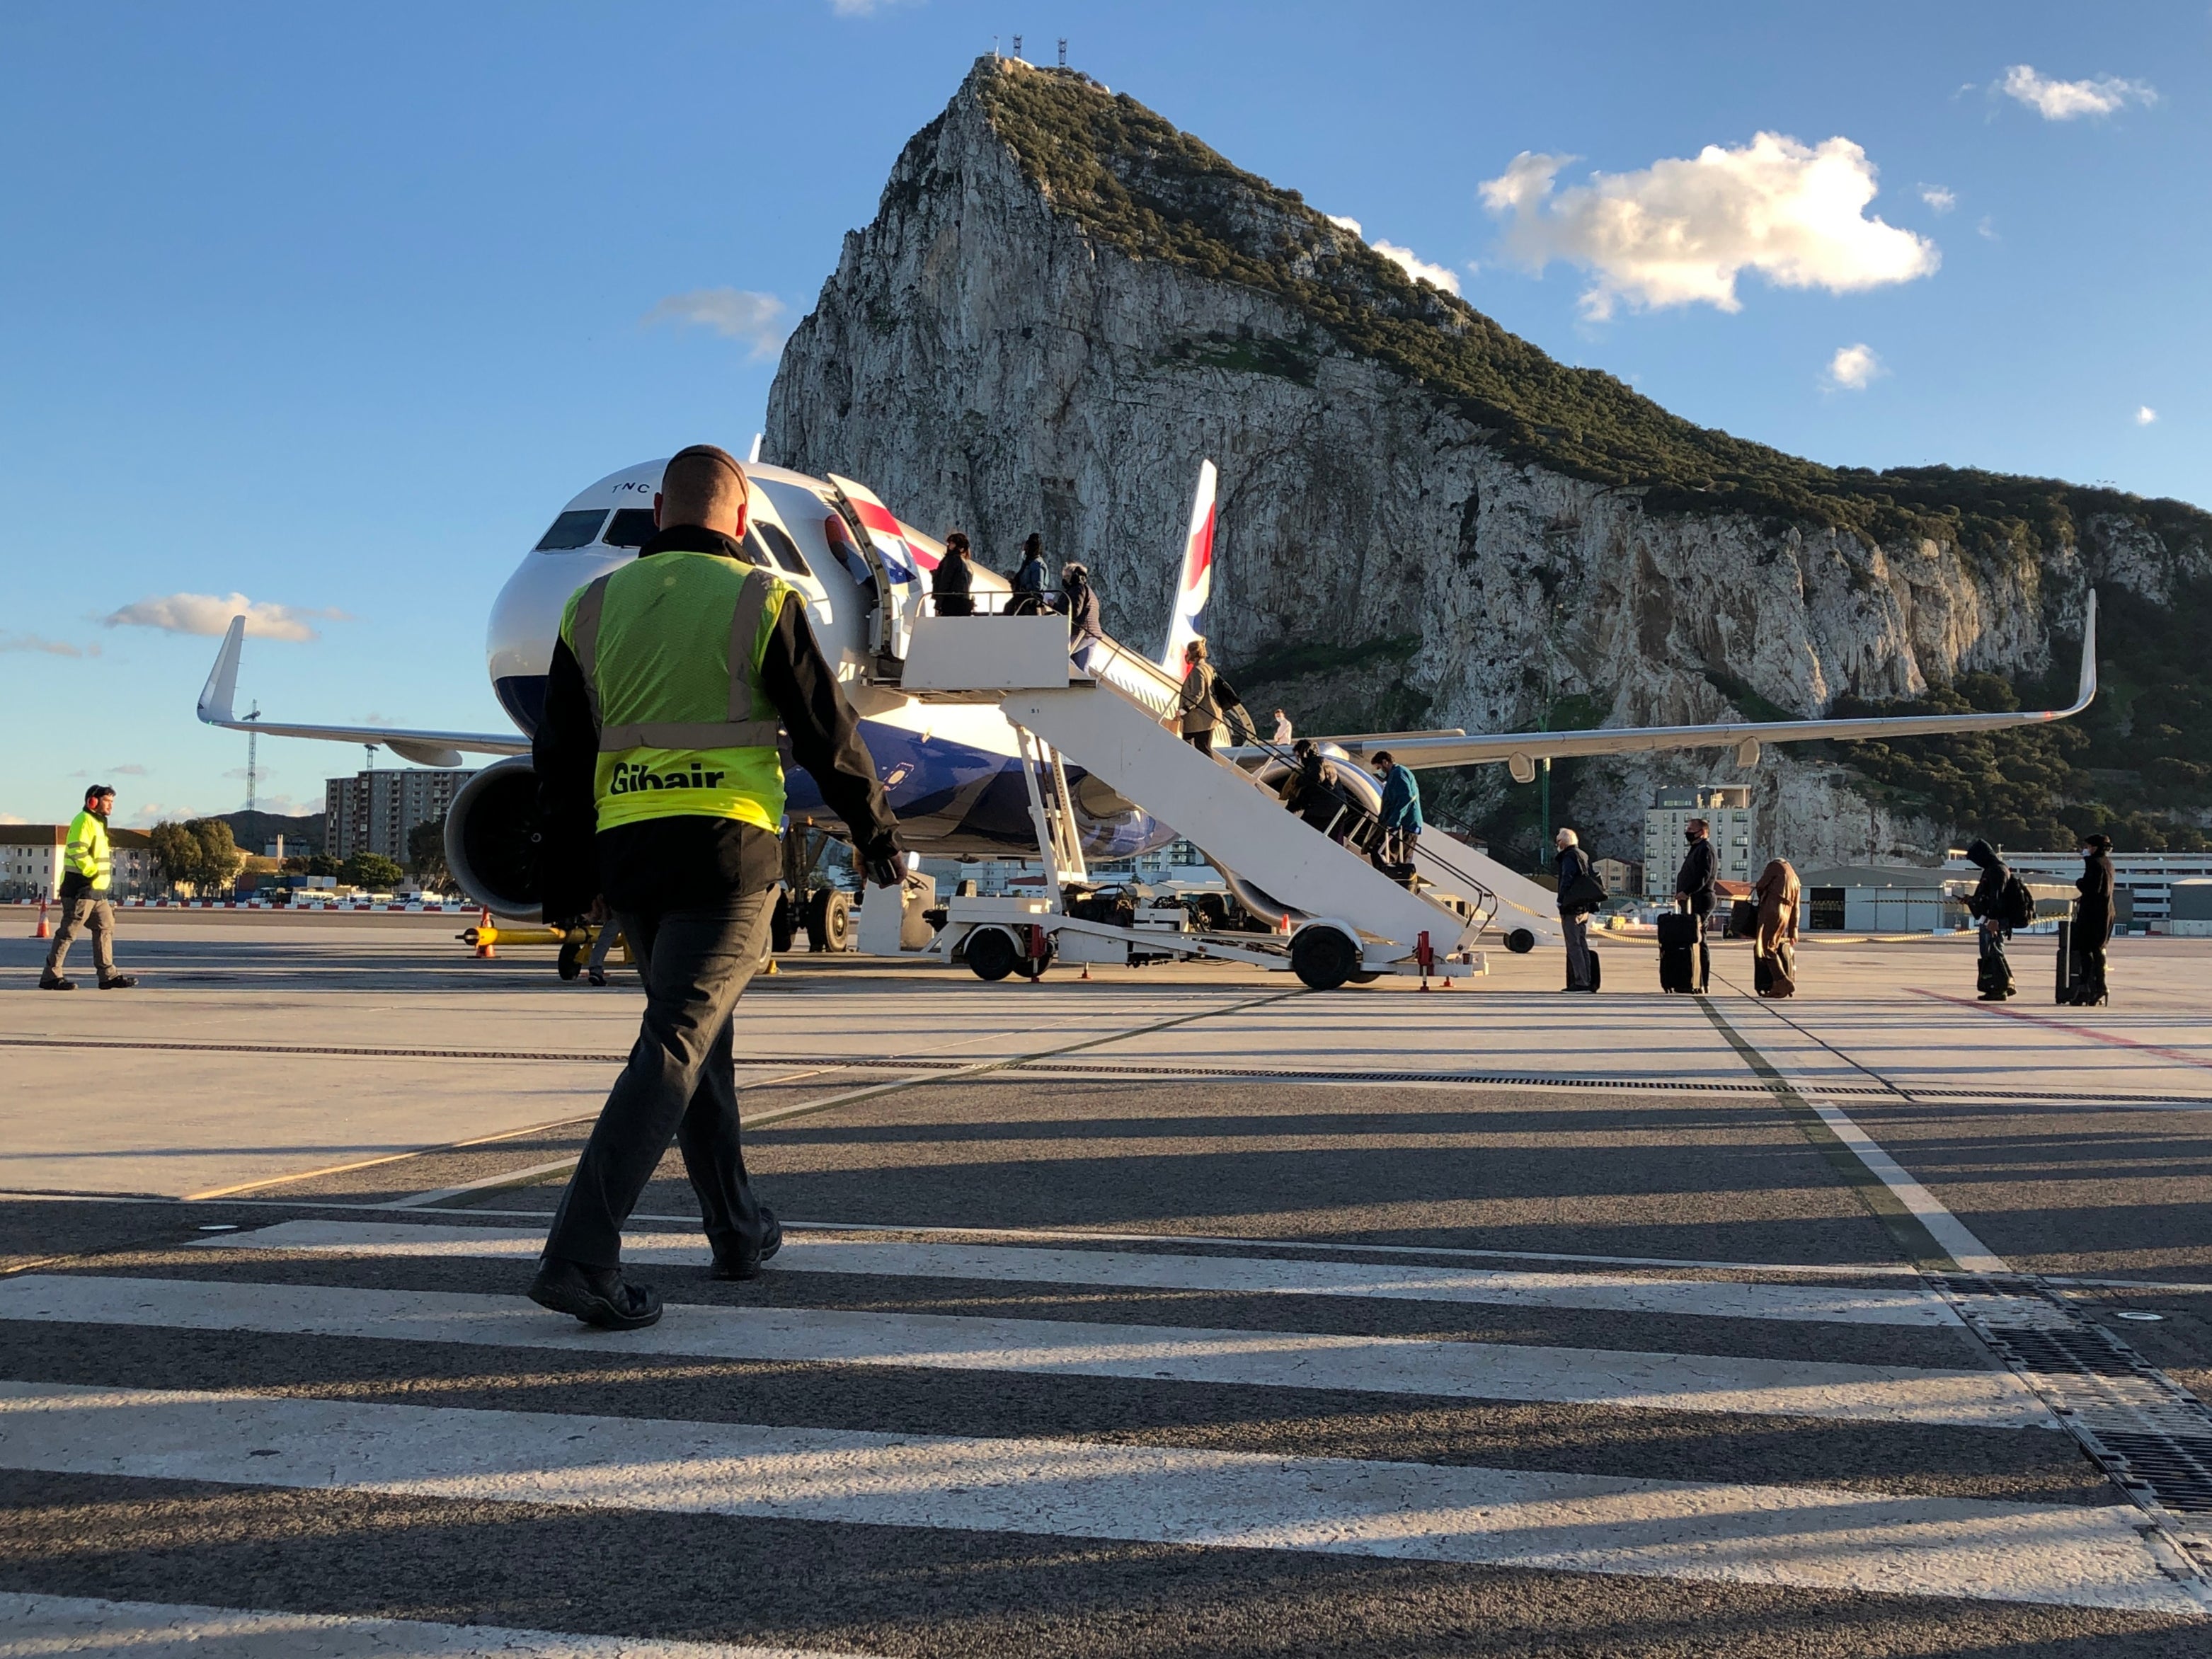 Rock solid: Gibraltar is one of very few airports that is aesthetically rewarding